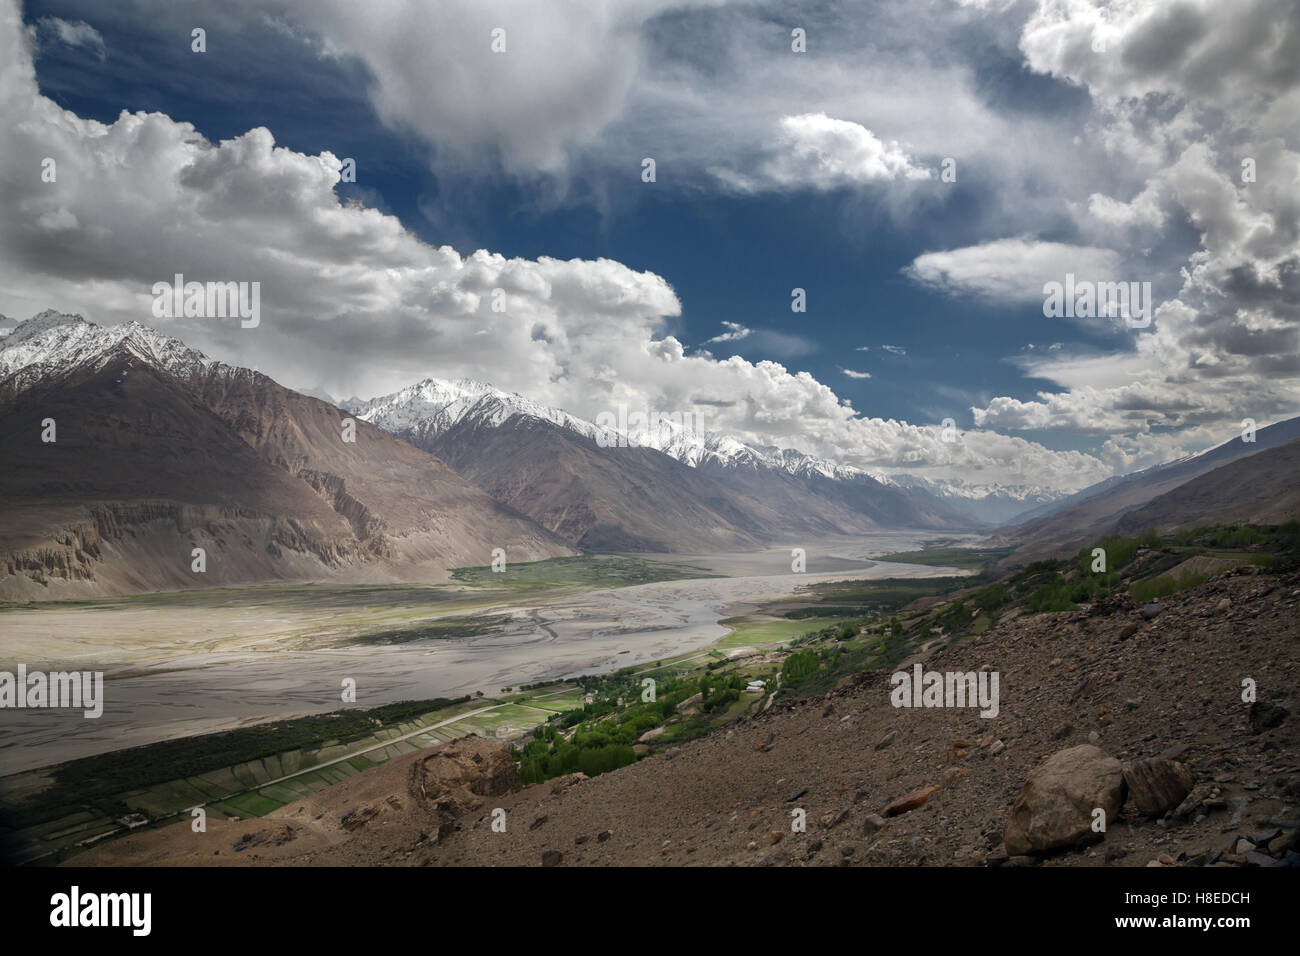 Landscape in Wakhan valley near Yamchun fort  - Tajikistan side - GBAO province - Afghanistan is at the other side of the river Stock Photo